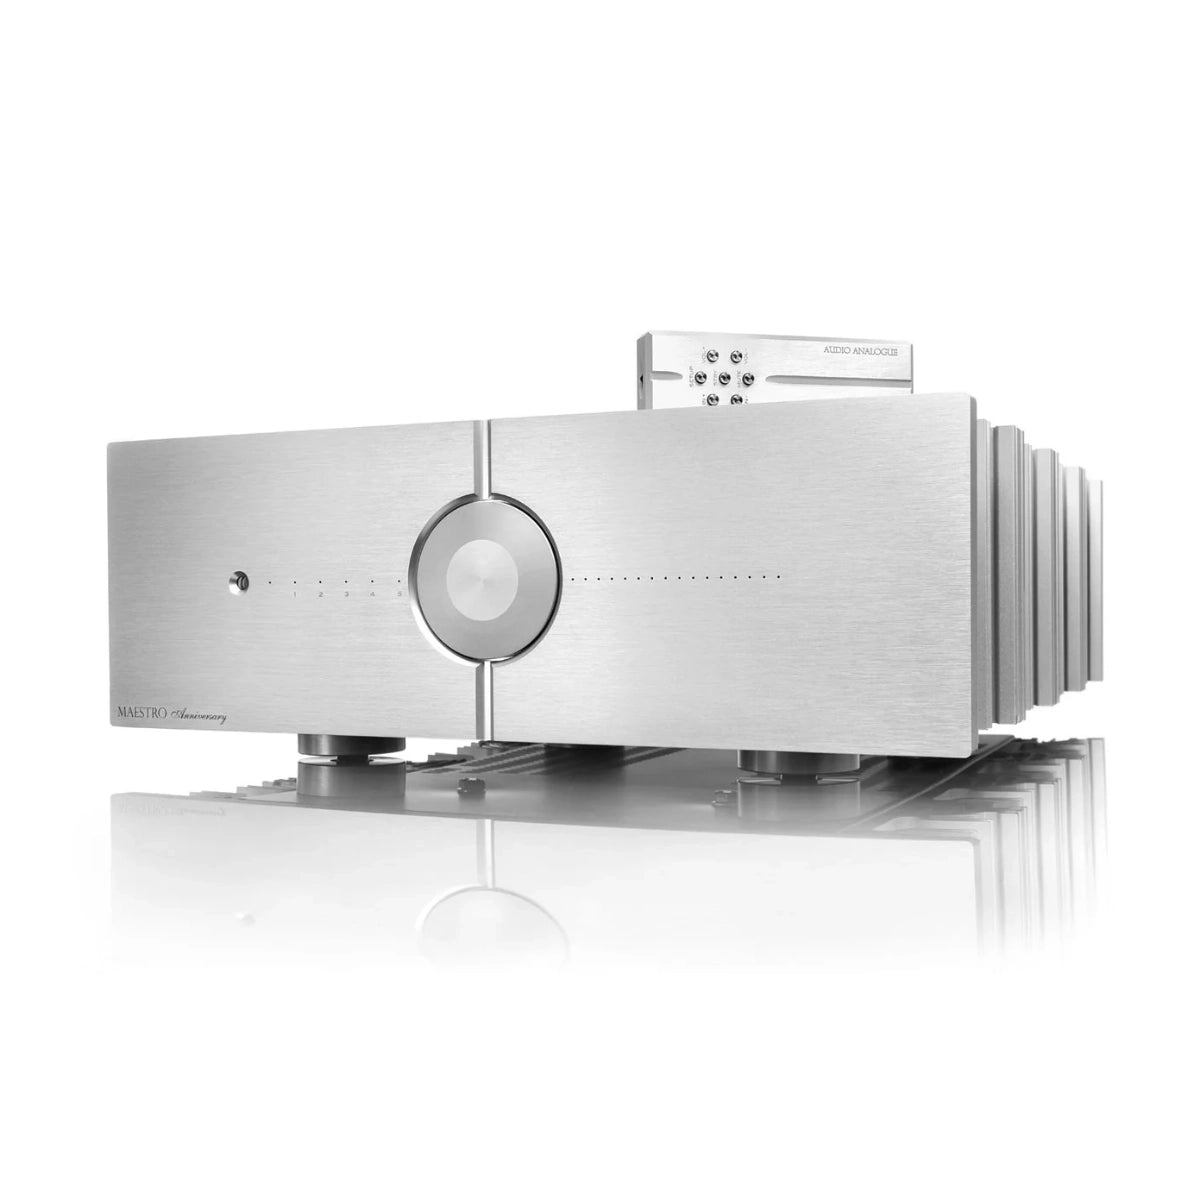 An image of Audio Analogue's Maestro 150W Integrated Amplifier in silver finish, RR version.